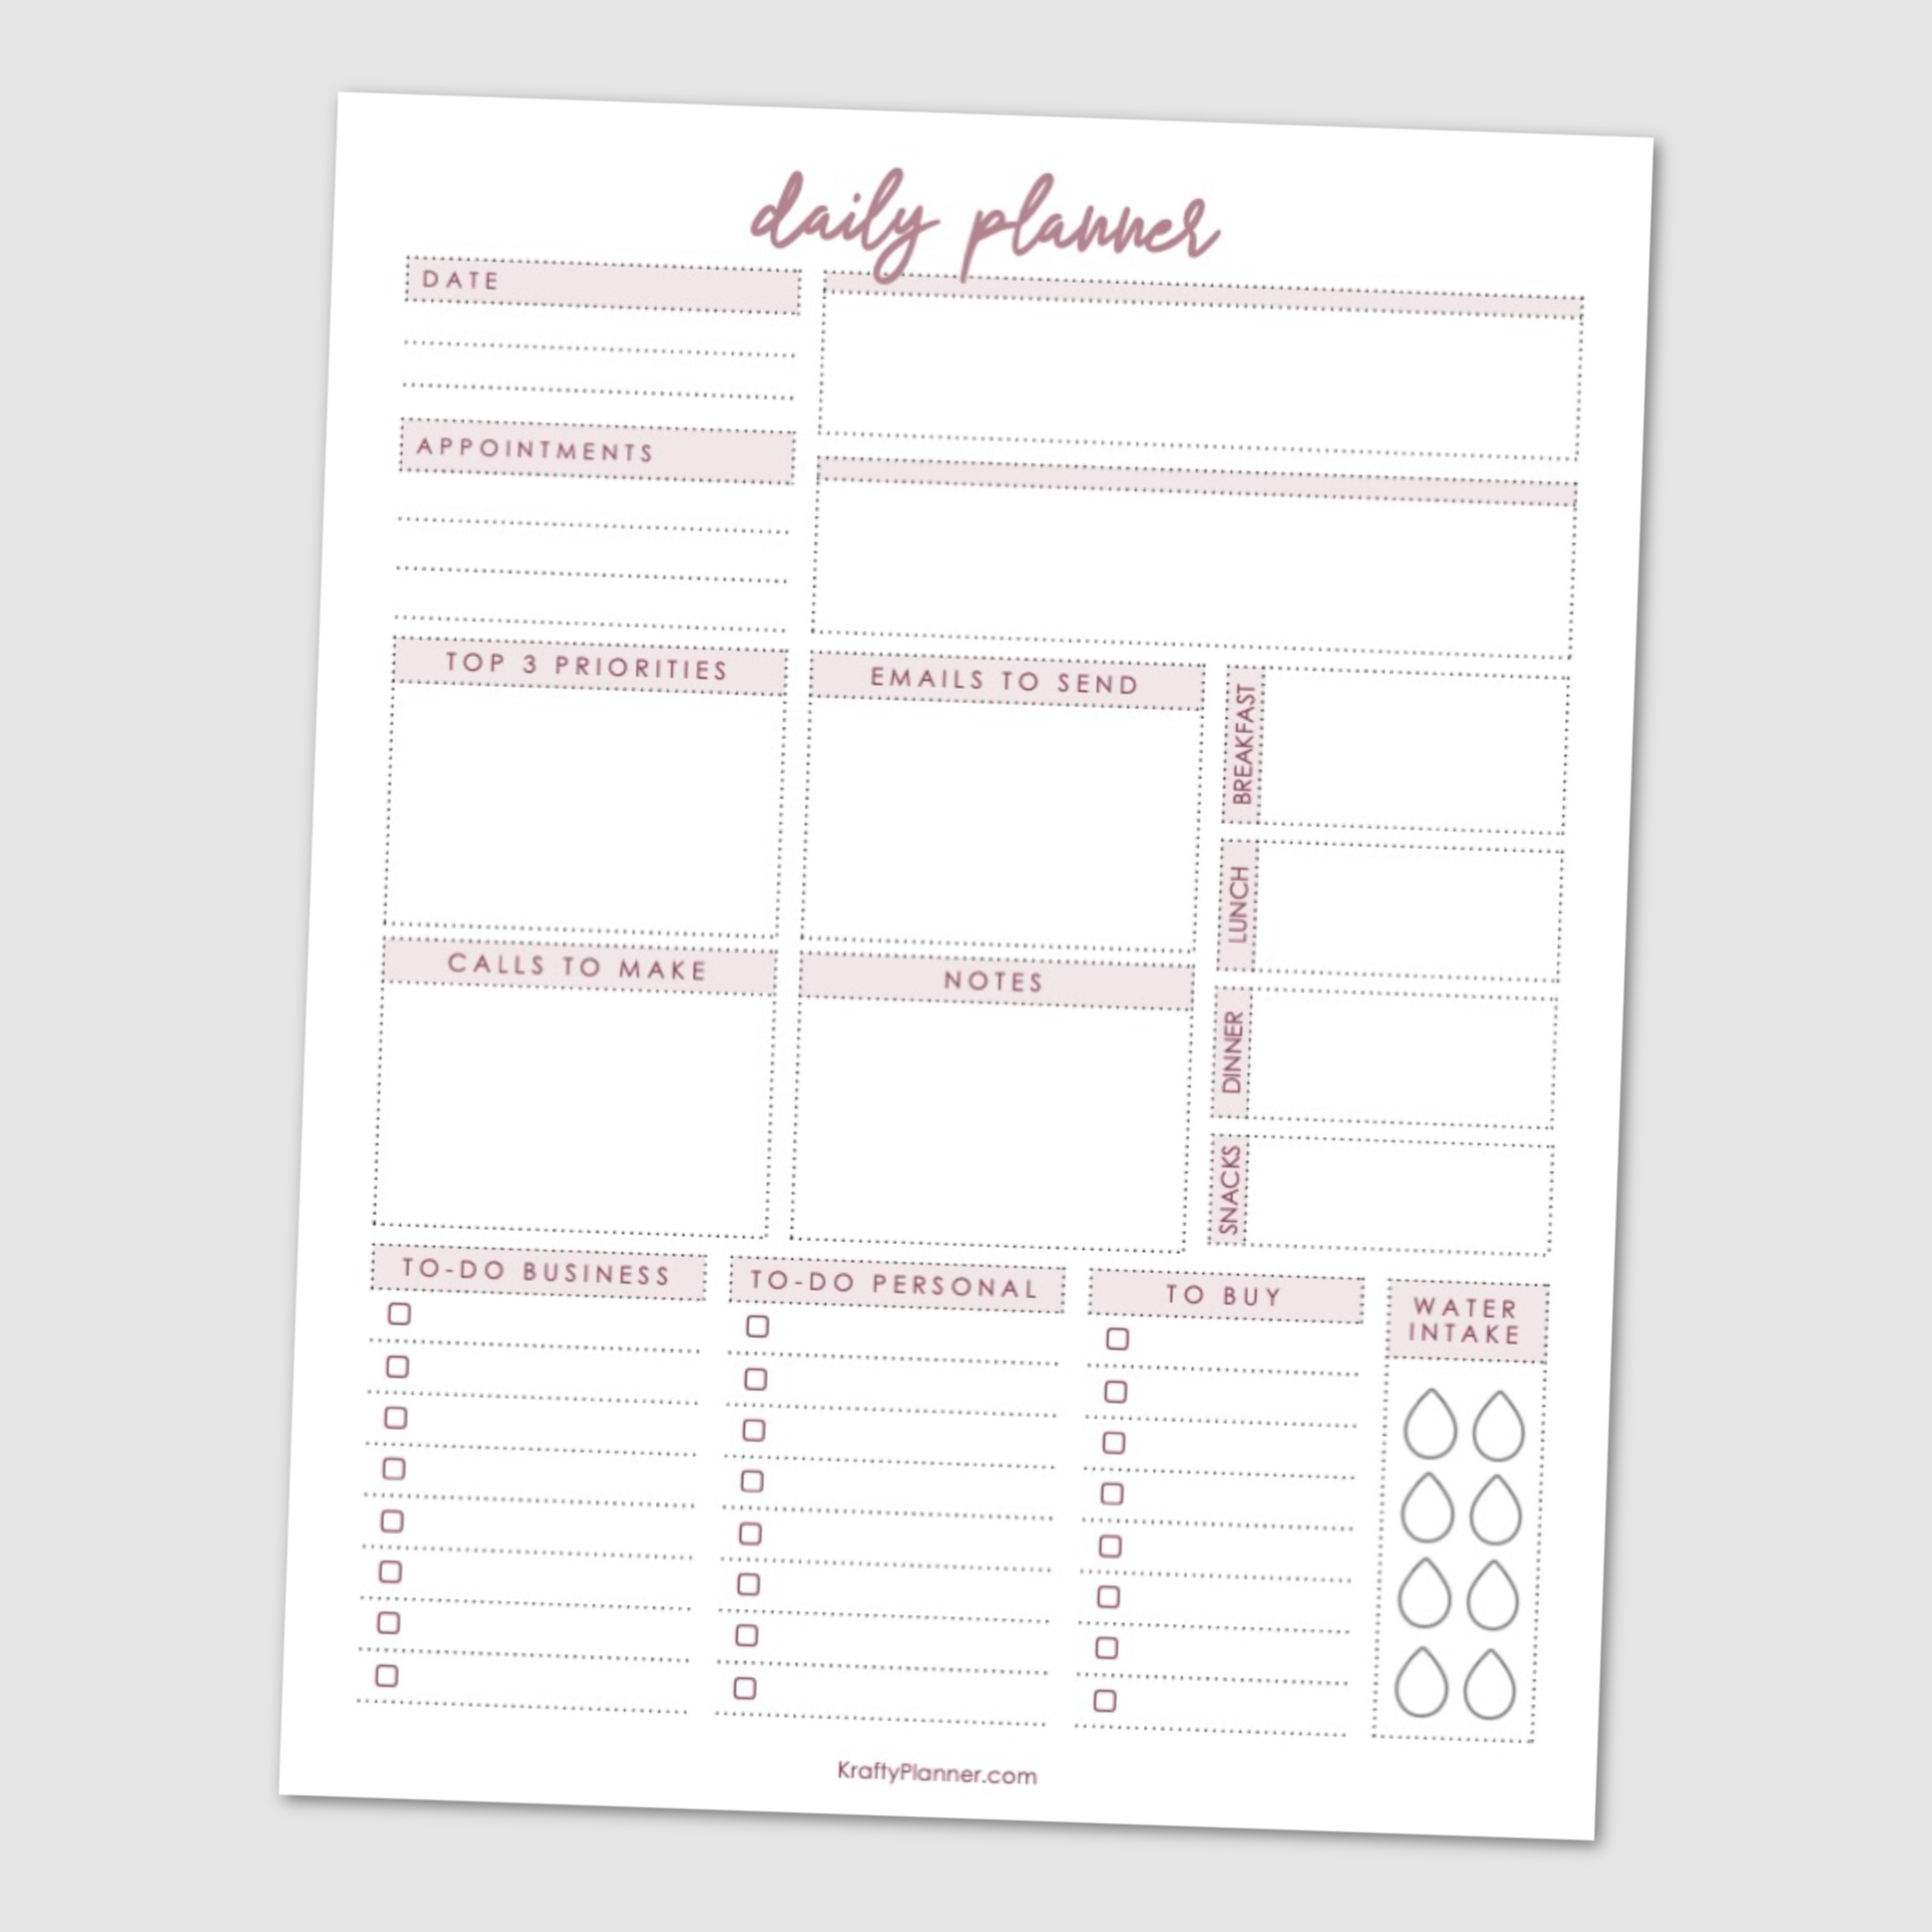 daily-planner-2020-daily-planner-goals-planner-meal-planner-cleaning-planner-water-tracker-to